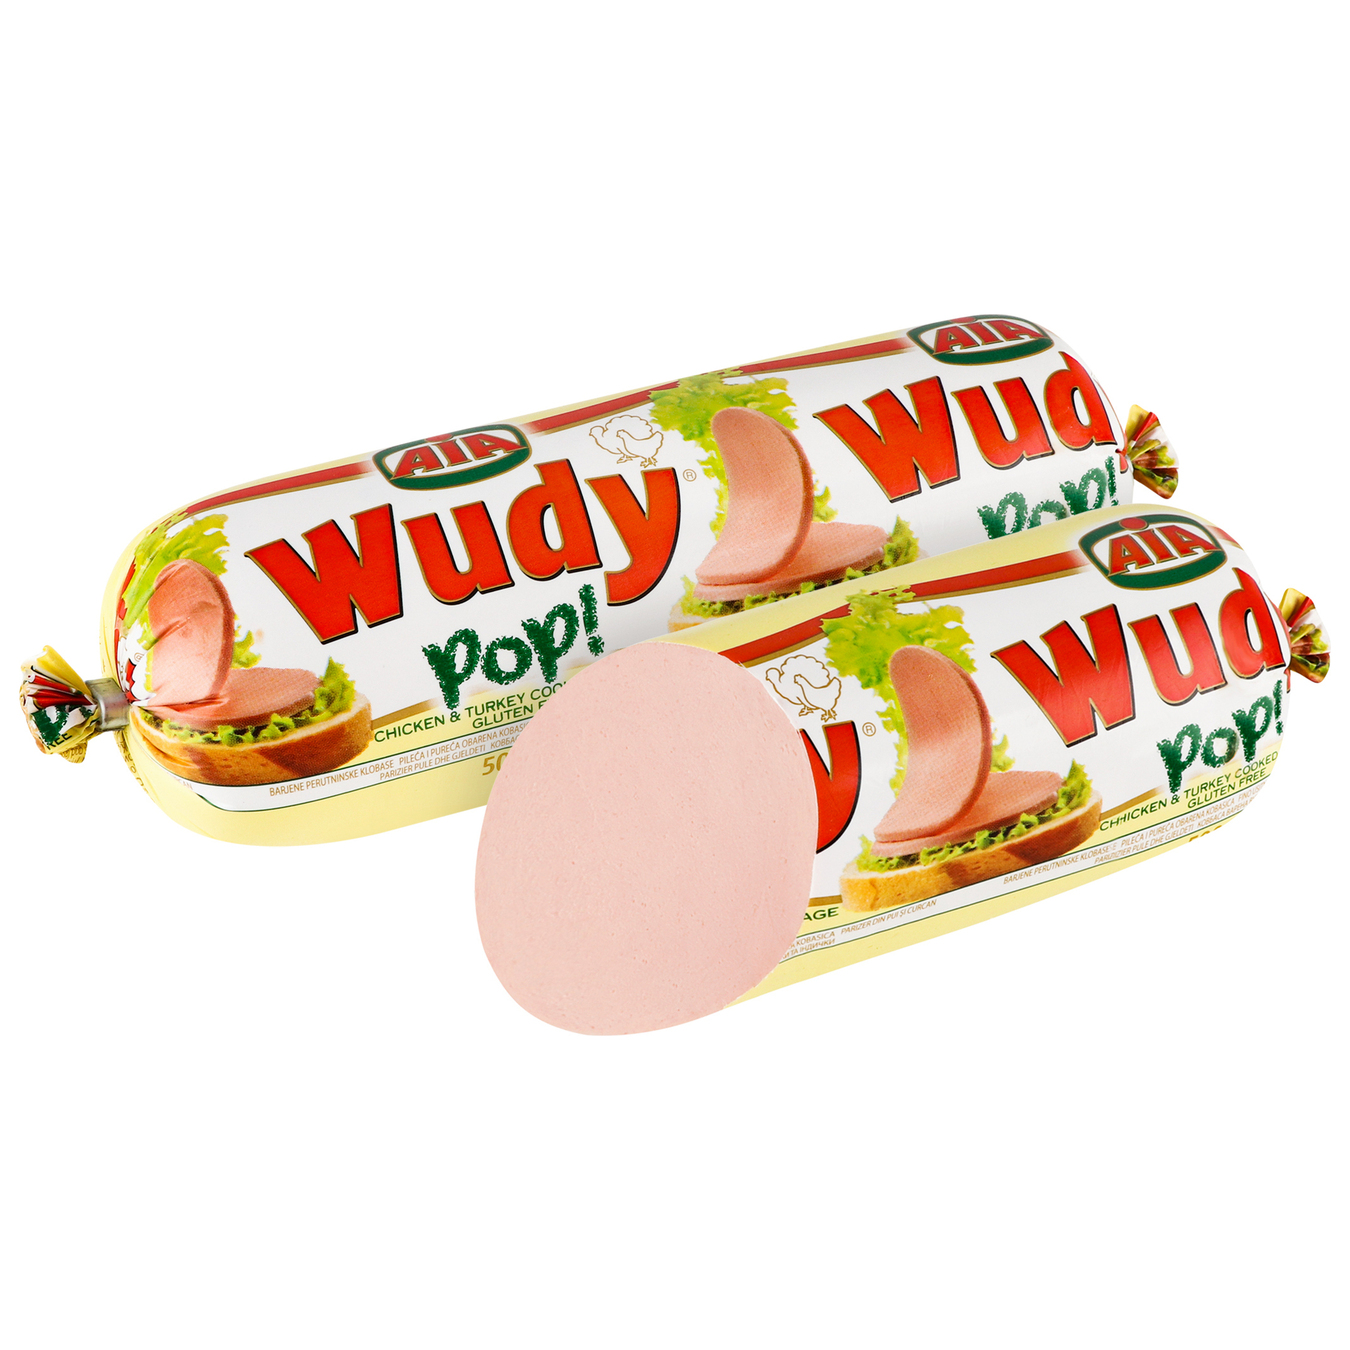 Wudy Pop sausage from chicken and turkey boiled 500g 4